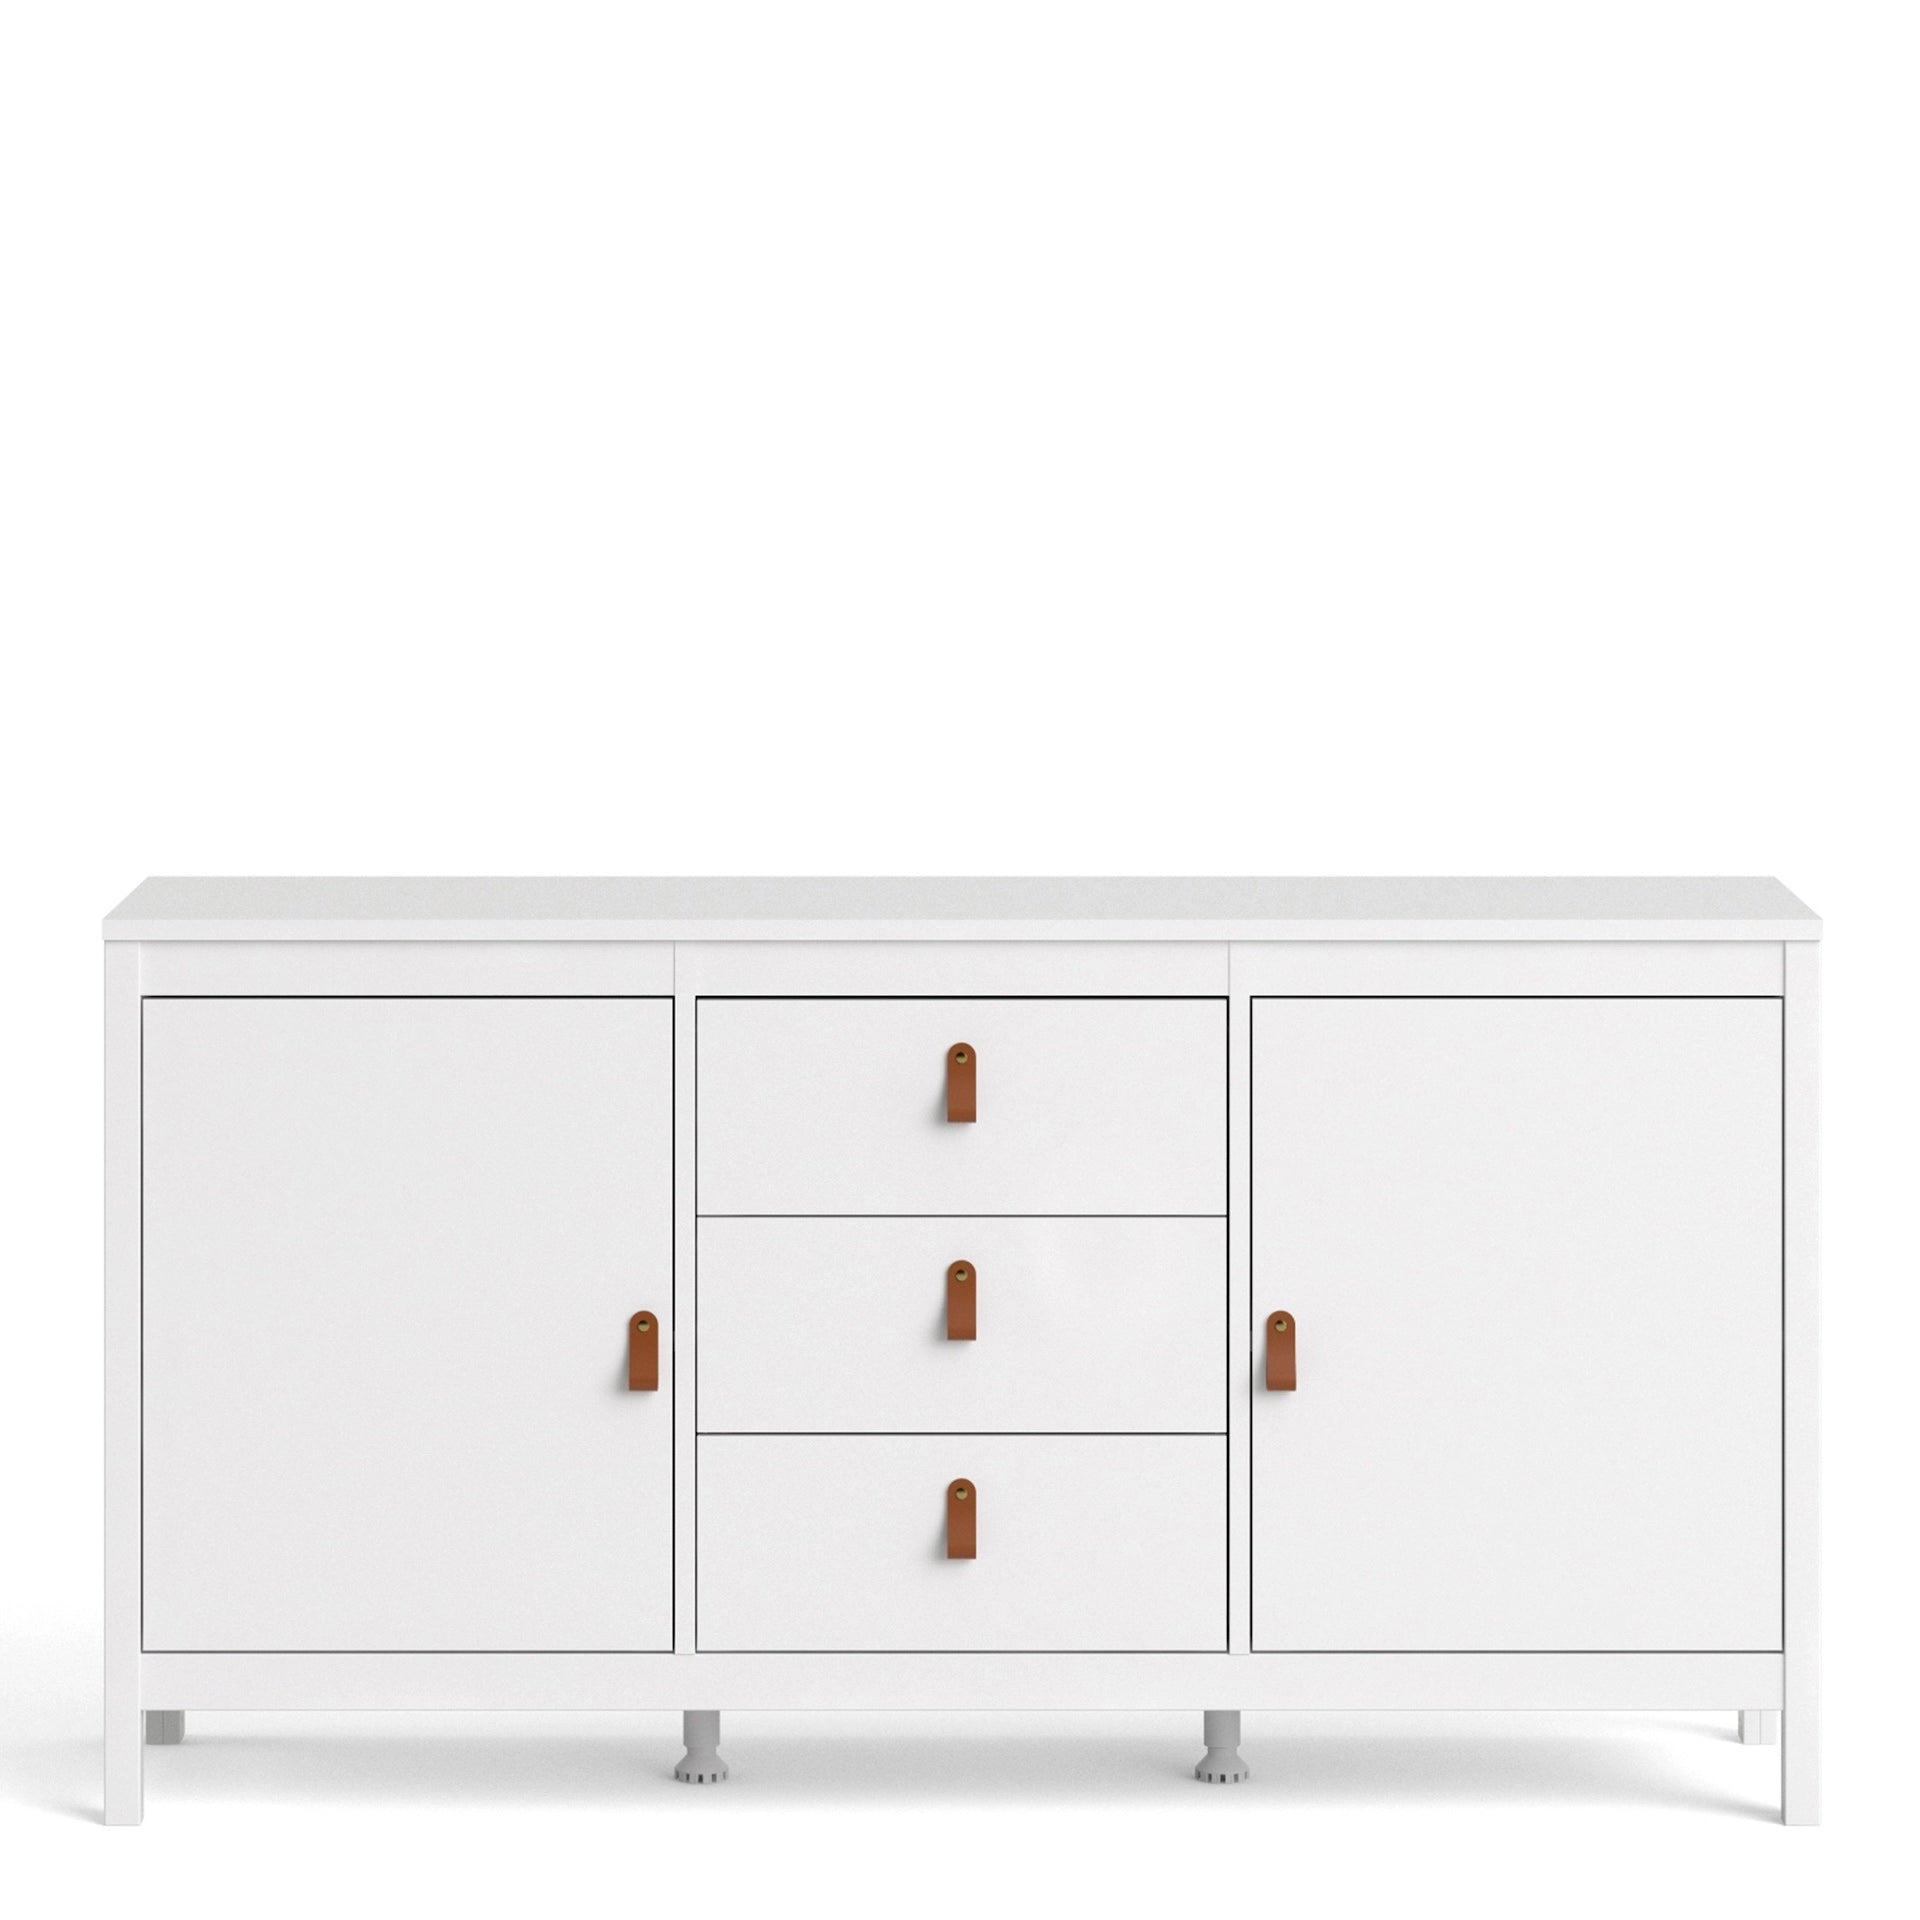 Furniture To Go Barcelona Sideboard 2 Doors + 3 Drawers in White